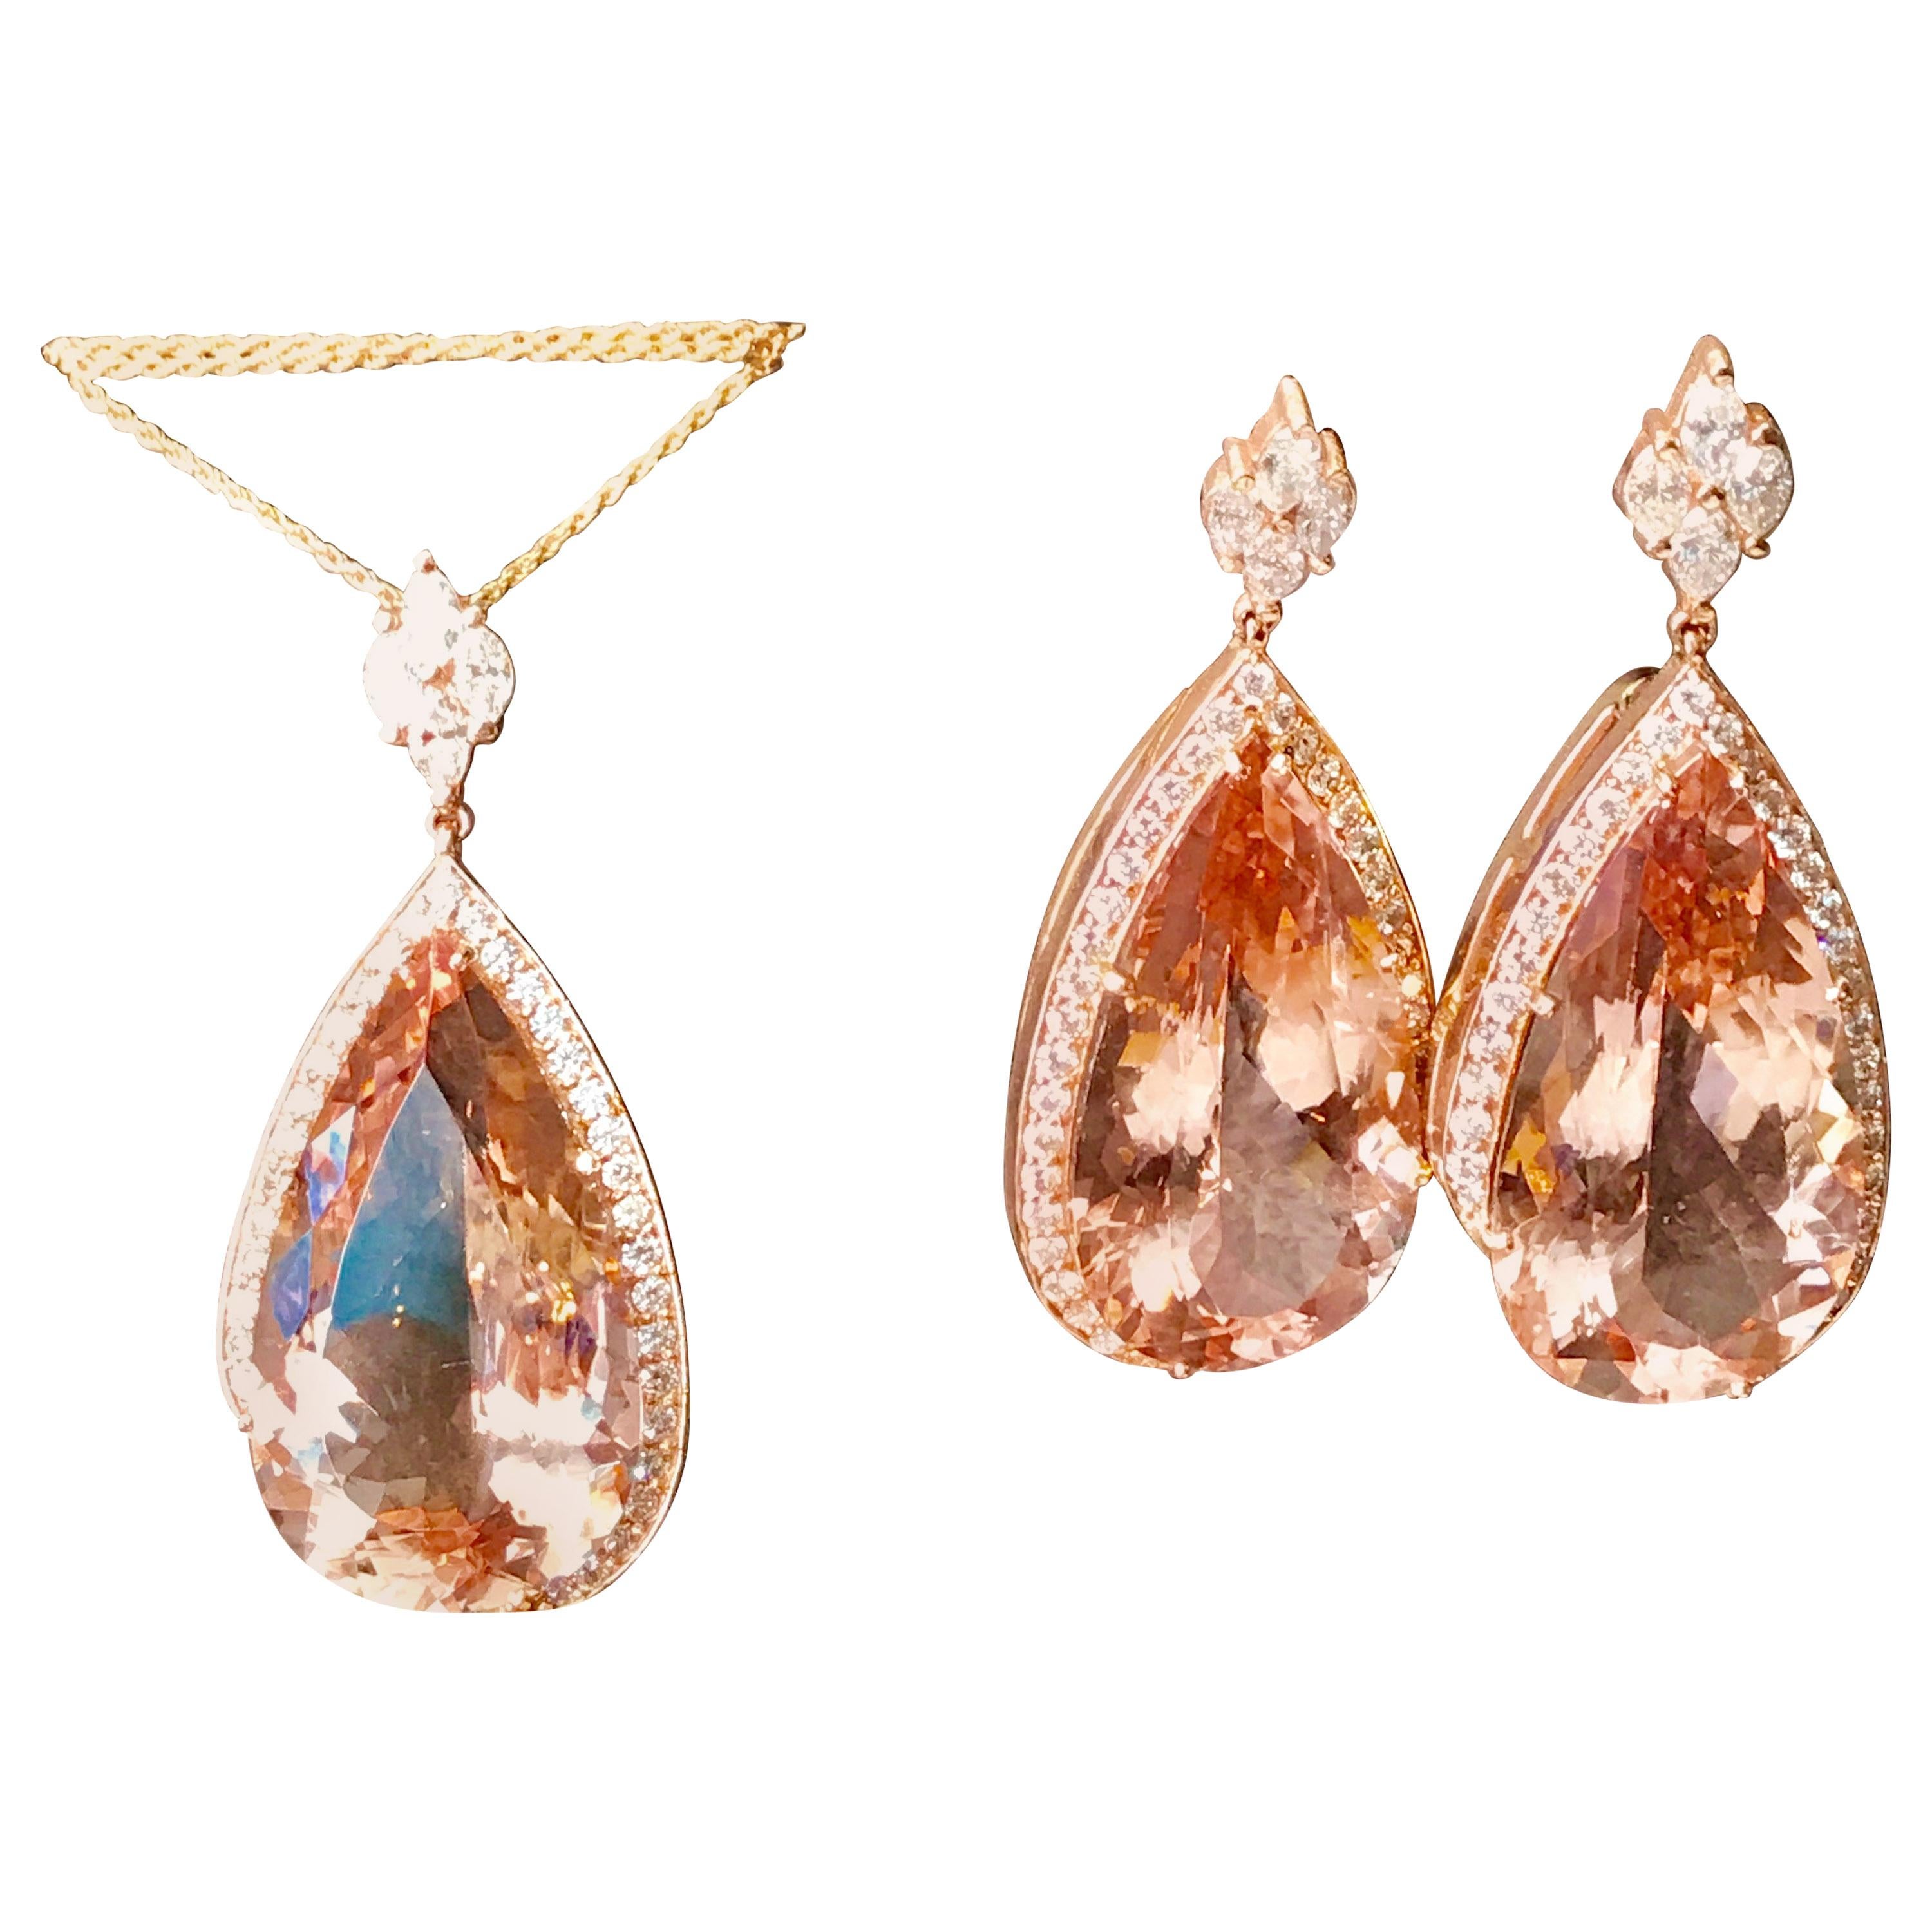 Approximately 200 Carat  Natural Morganite  & Diamond Cocktail  Earring And Pendant Set
perfect pair made in 18 Karat Pink  gold
Gold with stones weight 55 Grams
 Diamonds: approximate 7.5 ct 
Whole set is made in pink gold.
all three pieces are